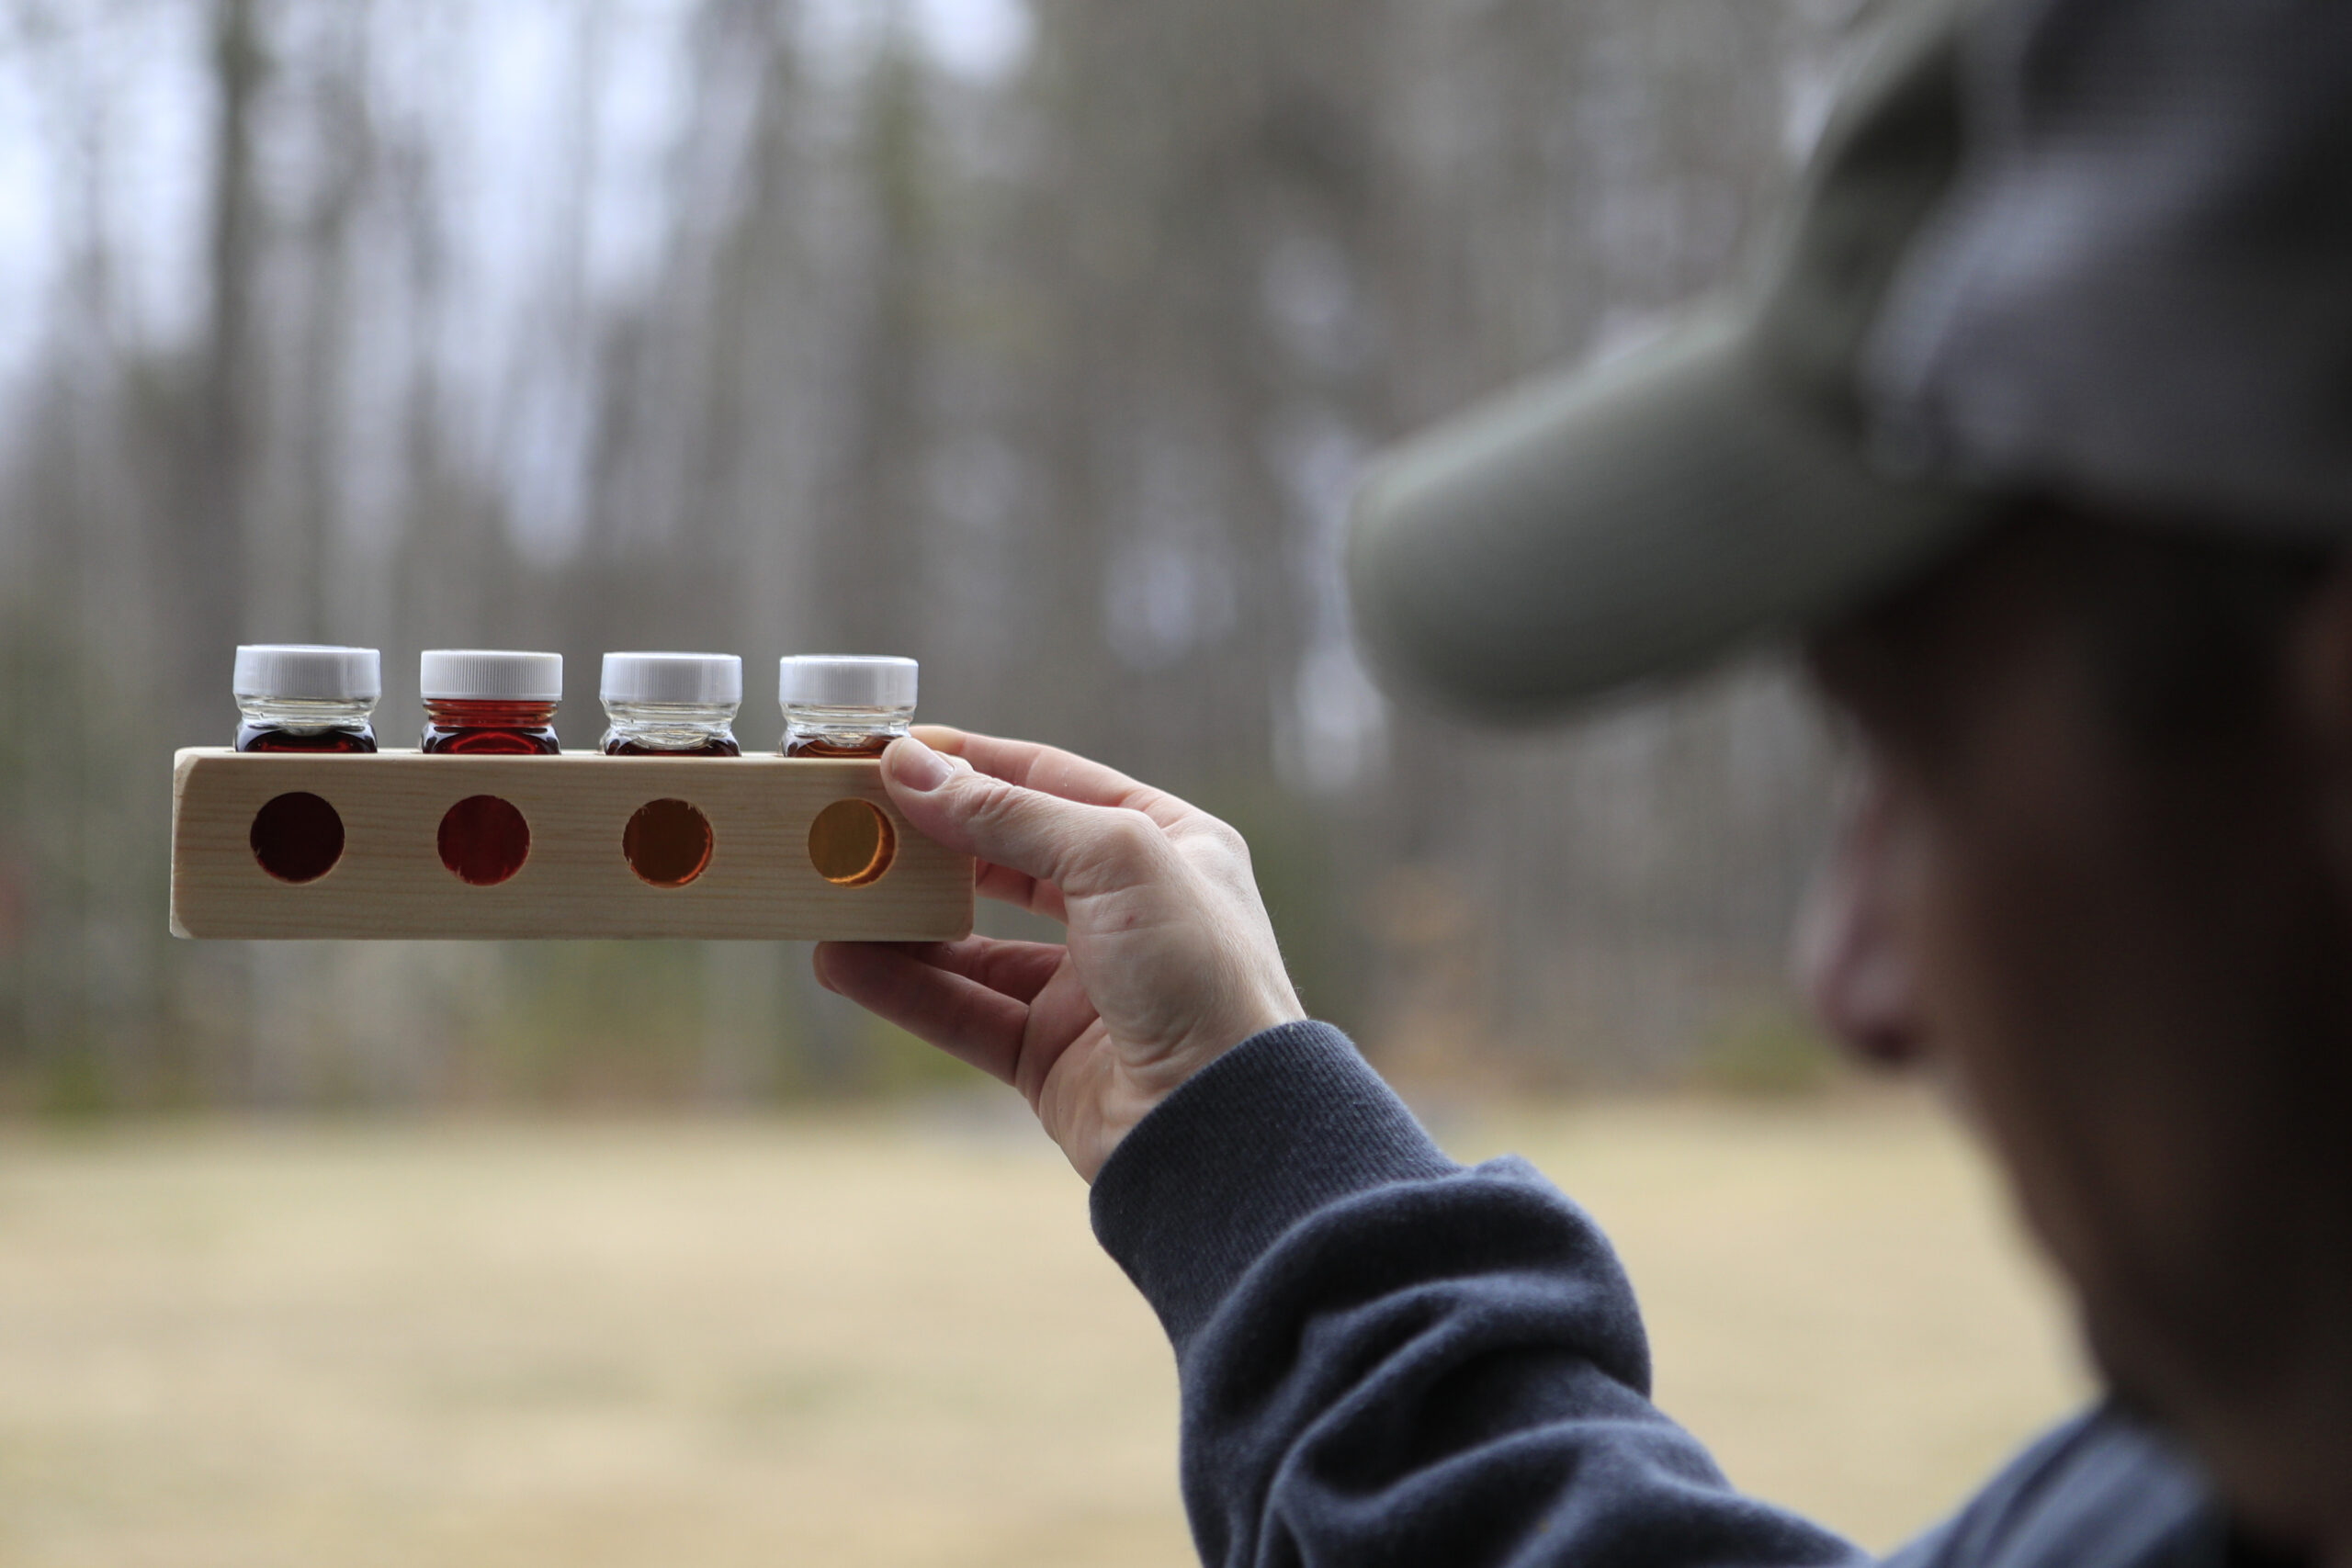 Scott Dunn gauges the grade of maple syrup.